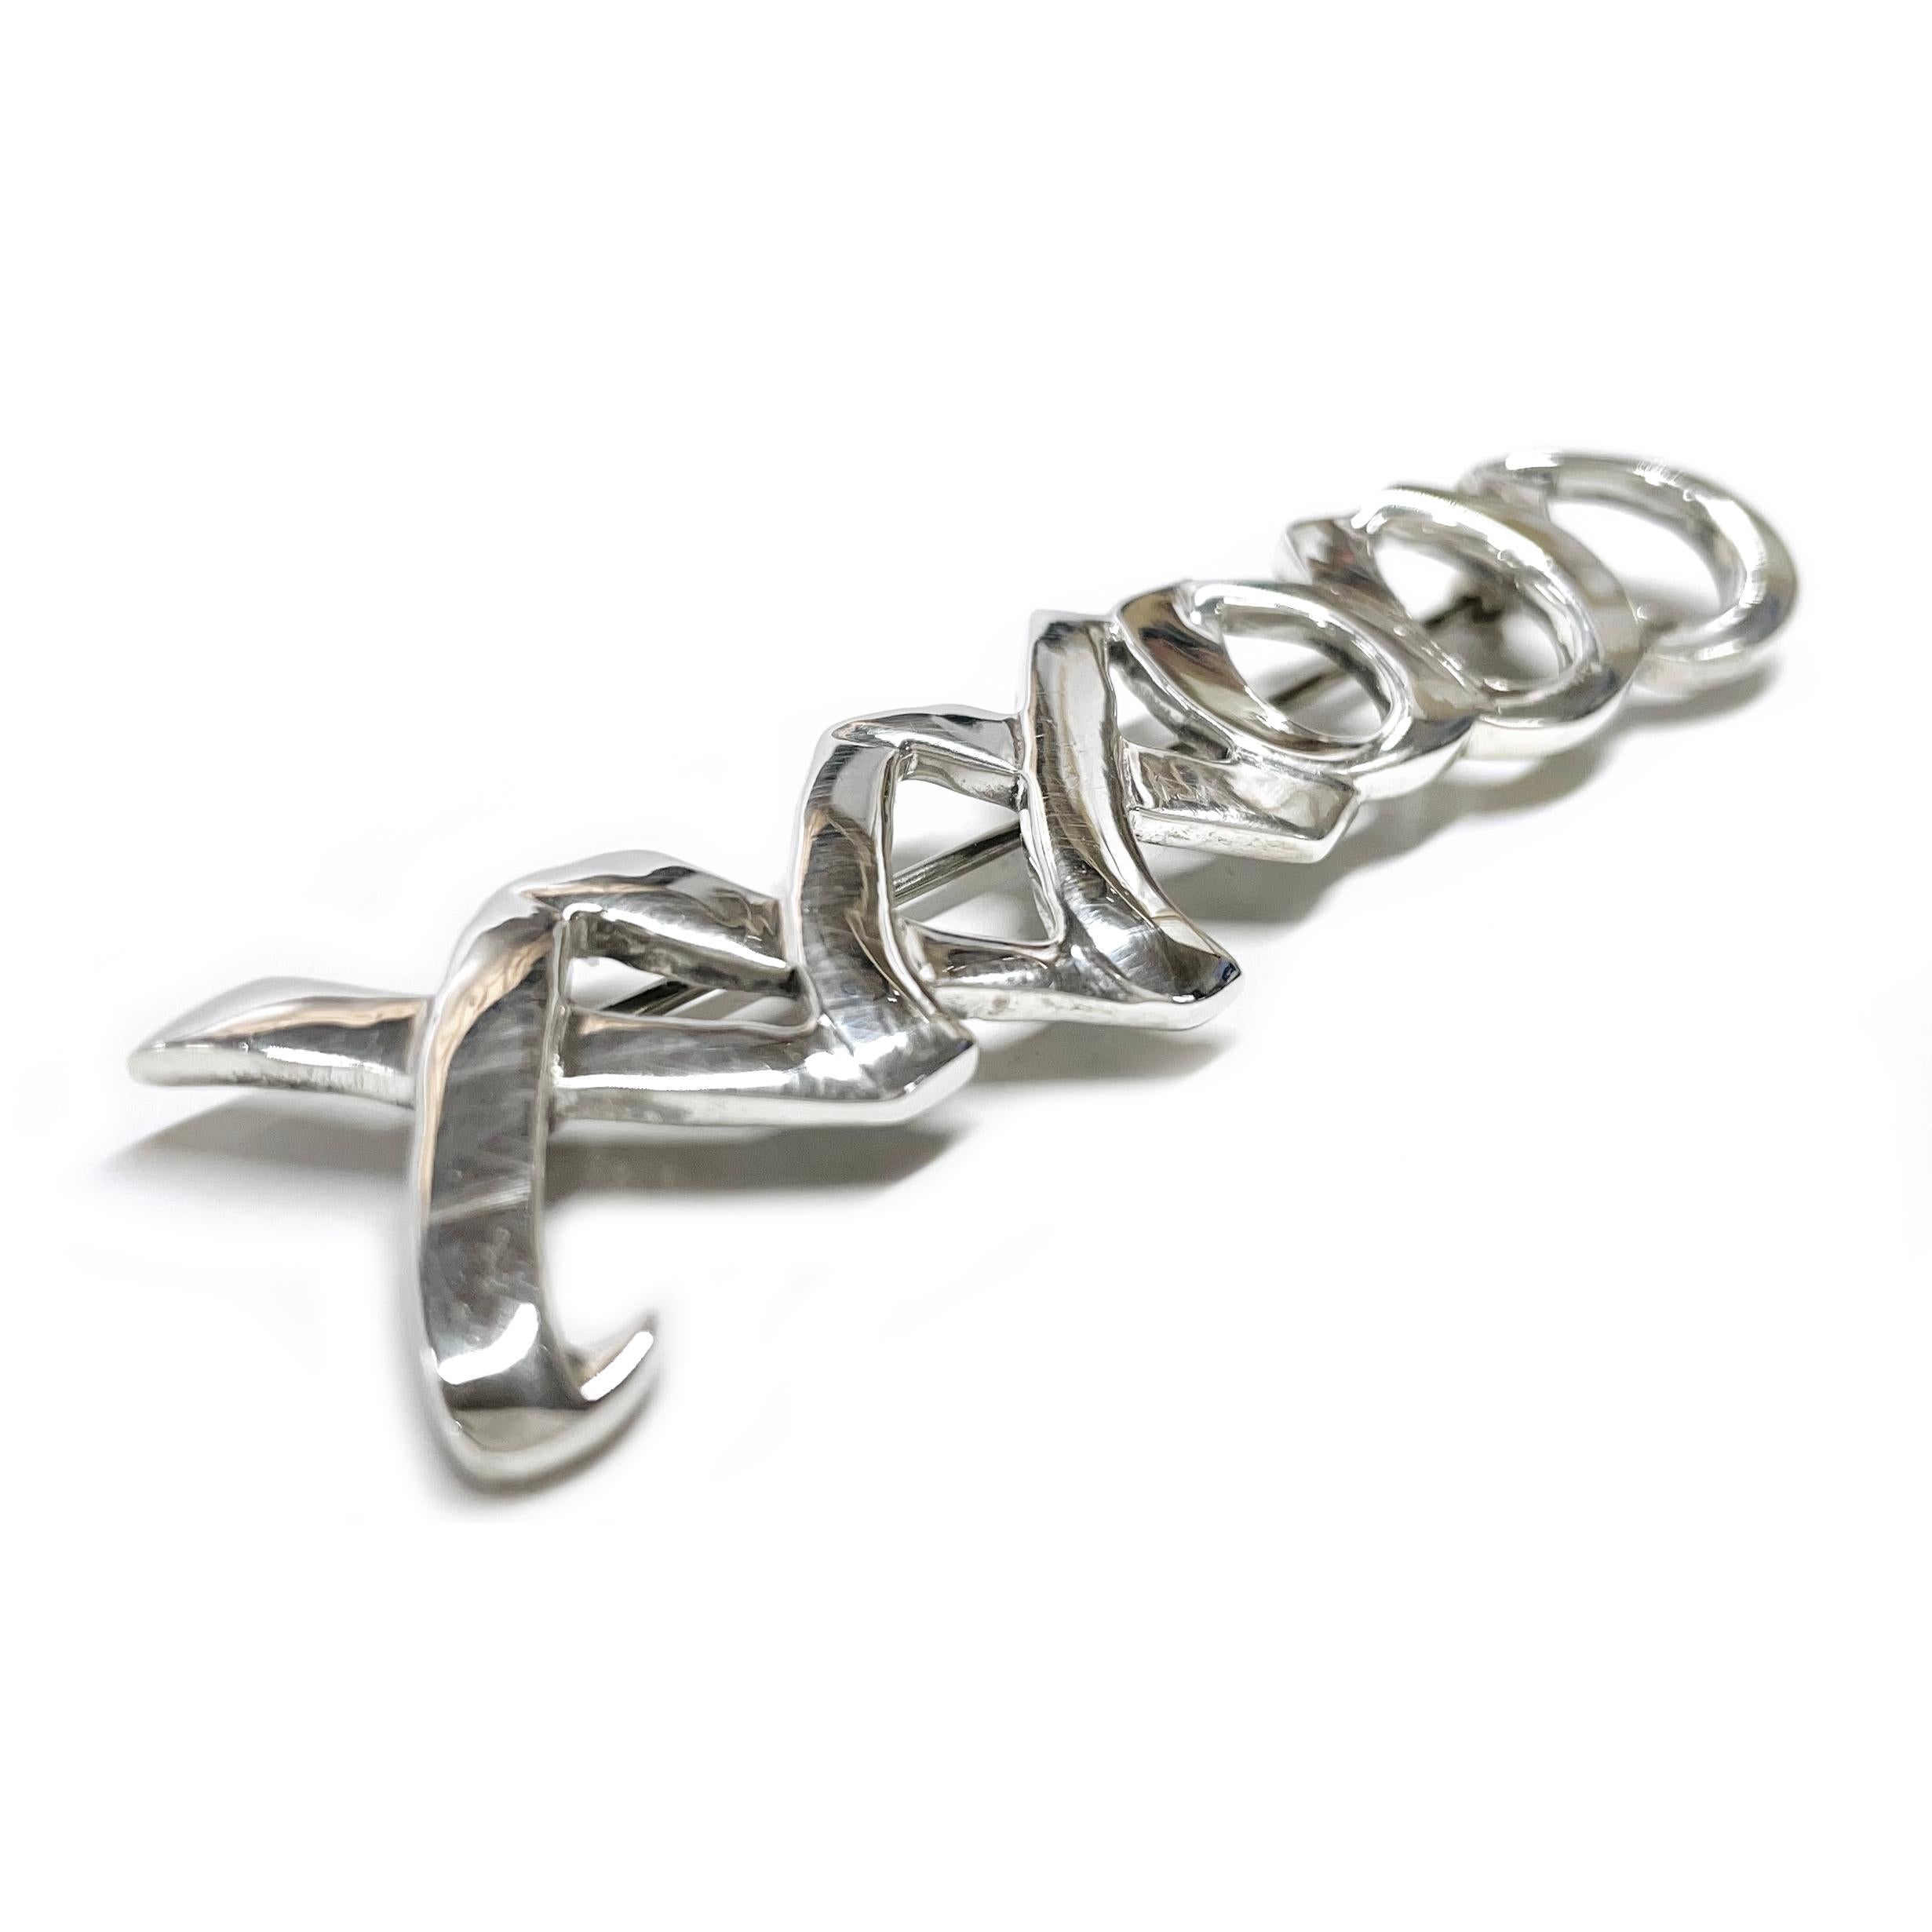 Vintage Tiffany & Co. Sterling Silver XXXOOO Brooch. The brooch features three x's and three o's in one continuous line. There are light surface scuffs but no major scratches. The brooch measures 18.00 in height and 68.62mm in width. Stamped on the